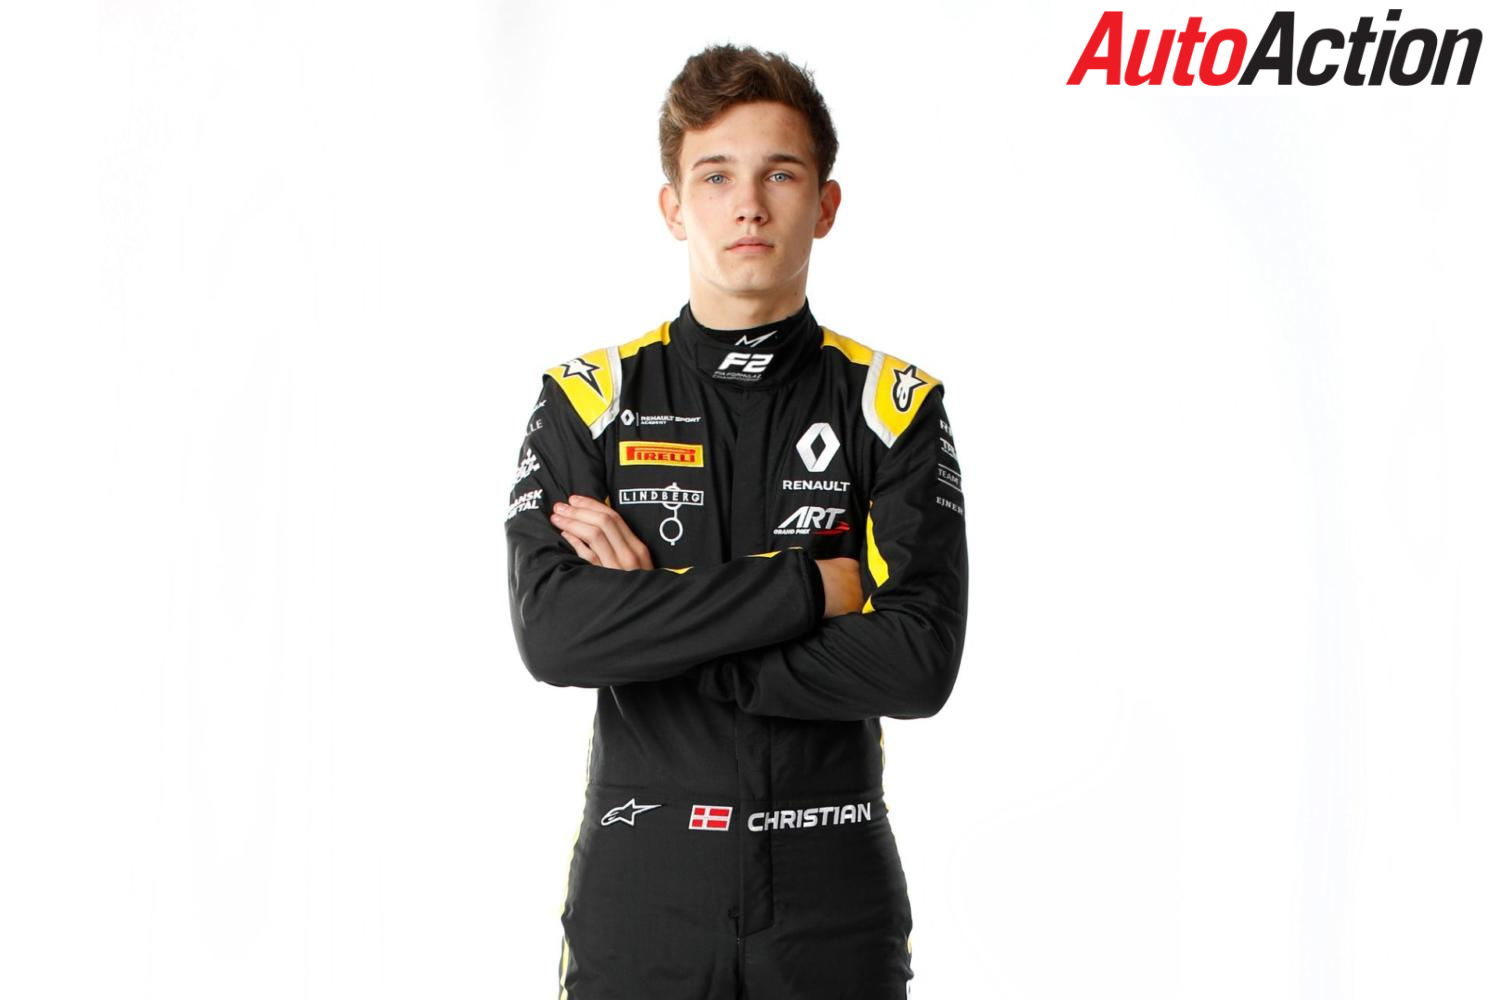 Renault Academy Driver joins ESeries as wildcard - Photo: Supplied